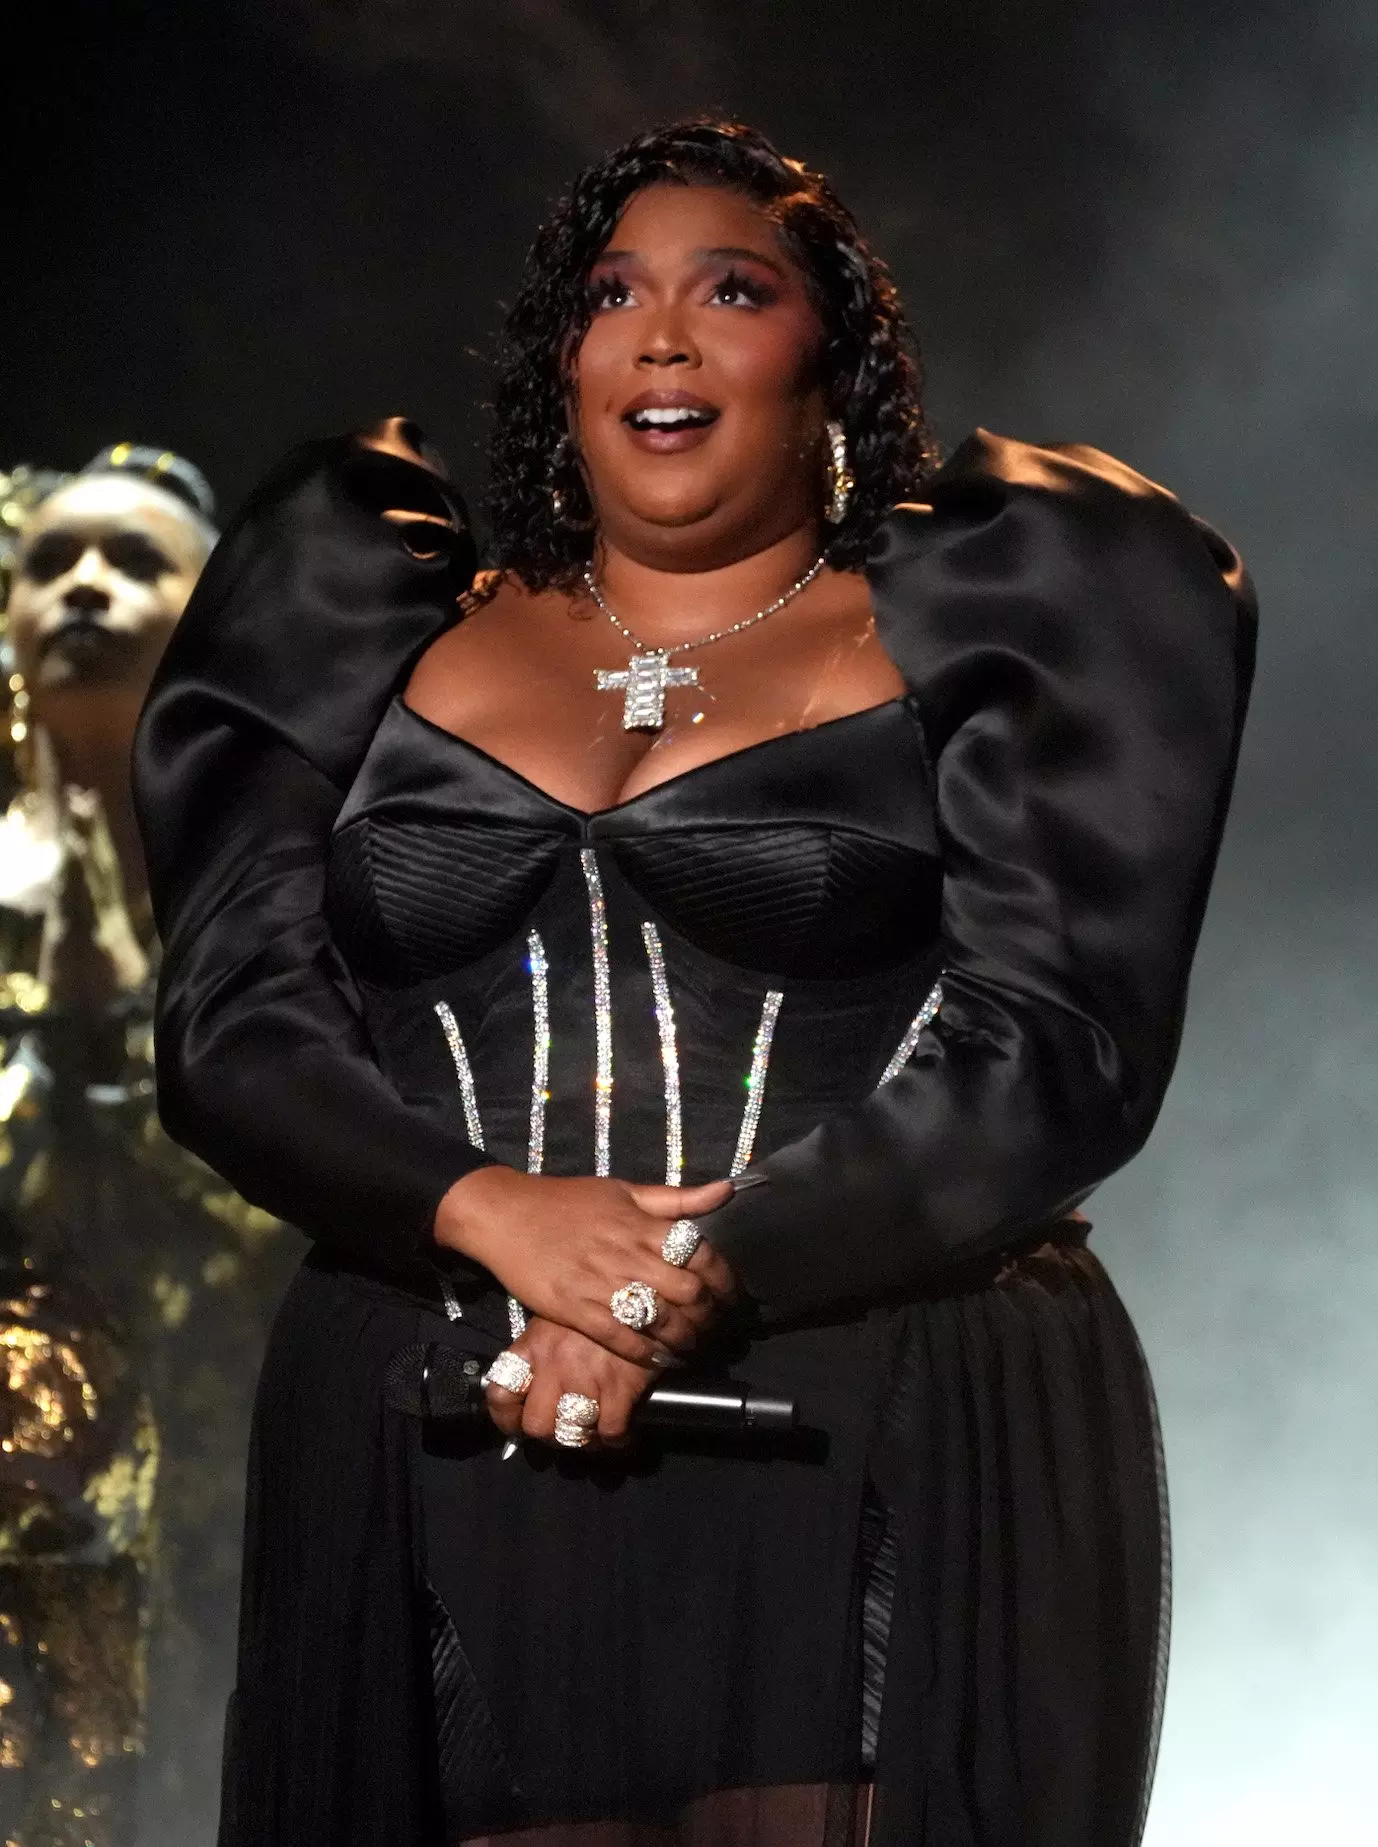 Lizzo performing at the 65th GRAMMY Awards